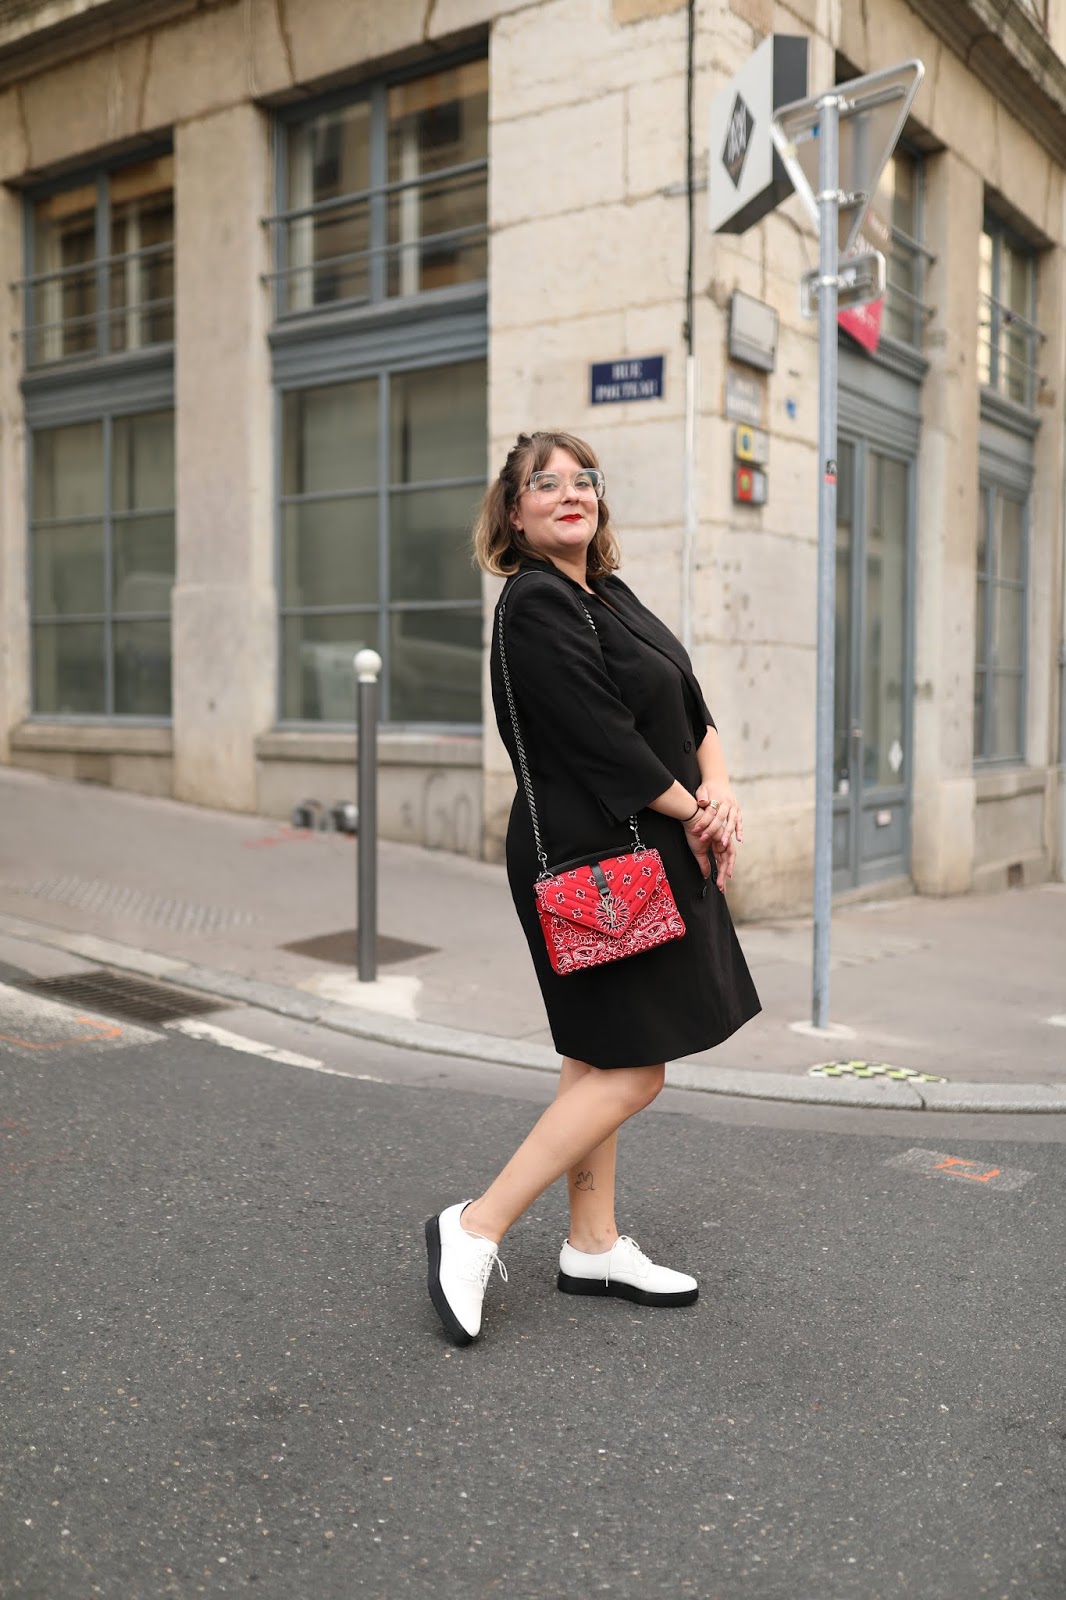 grande taille, blog, plus size, french blogger, lyon, mode, fashion, plus fashion, outfit, grande taille, mode, Lyon, look, plus size, bodypositive, french blogger, curves, loveyourself curvy gang